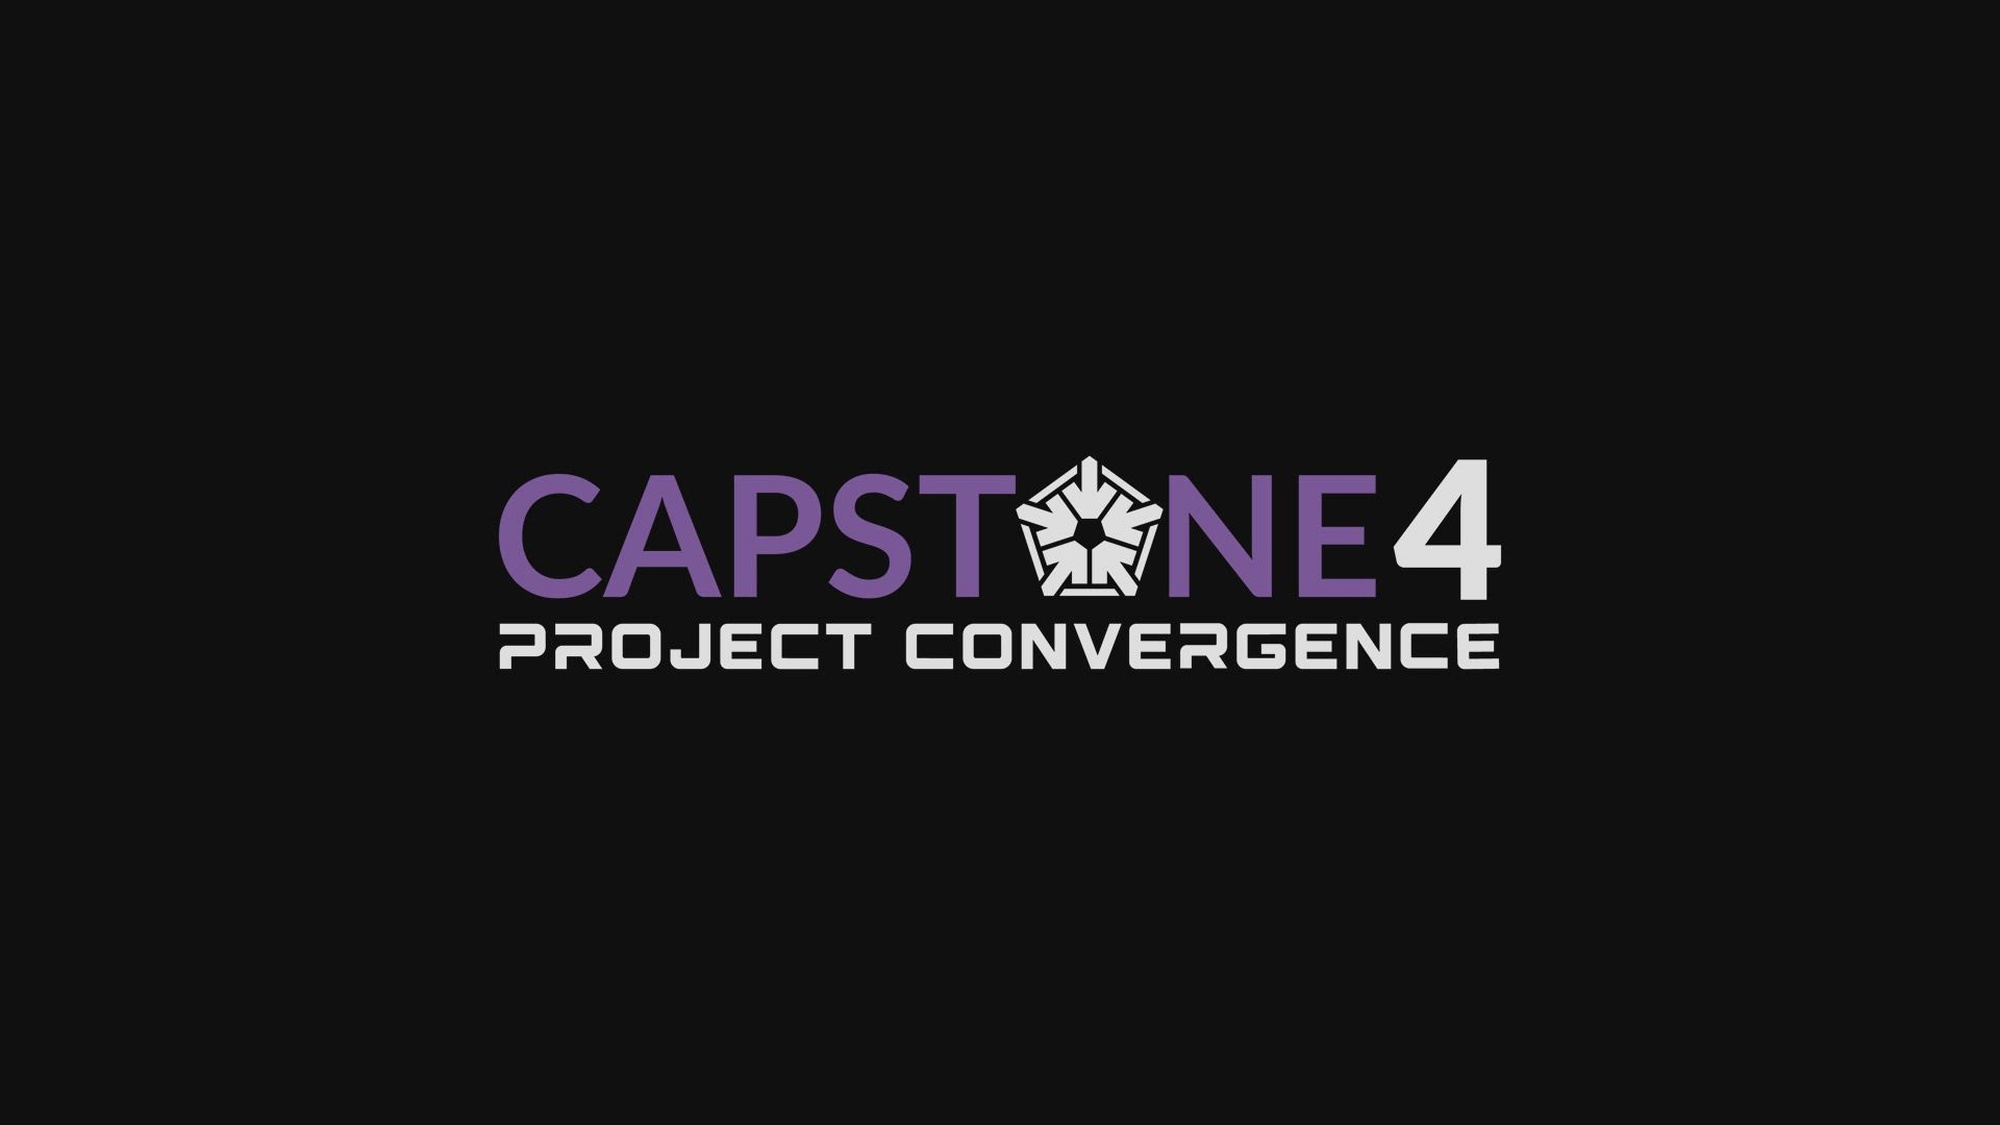 A black background with the purple and white Project Convergence Capstone 4 logo.